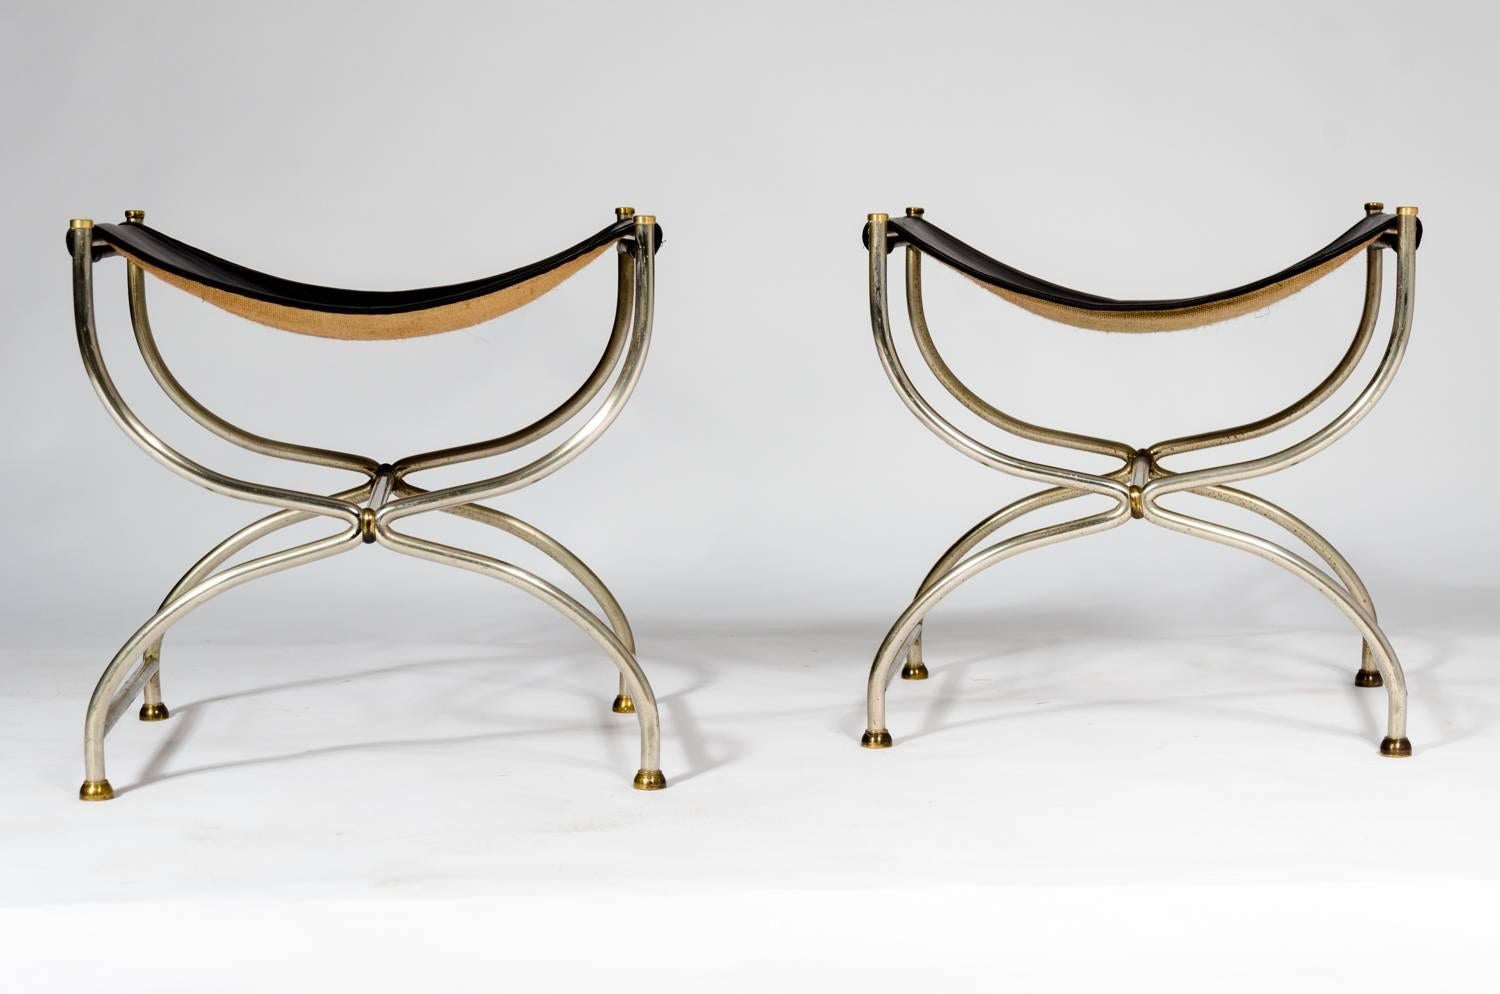 A pair of stool designed by Jansen work shop and manufactured in stainless steel, solid brass and black leather. The furniture is in its original state, circa 1960s.